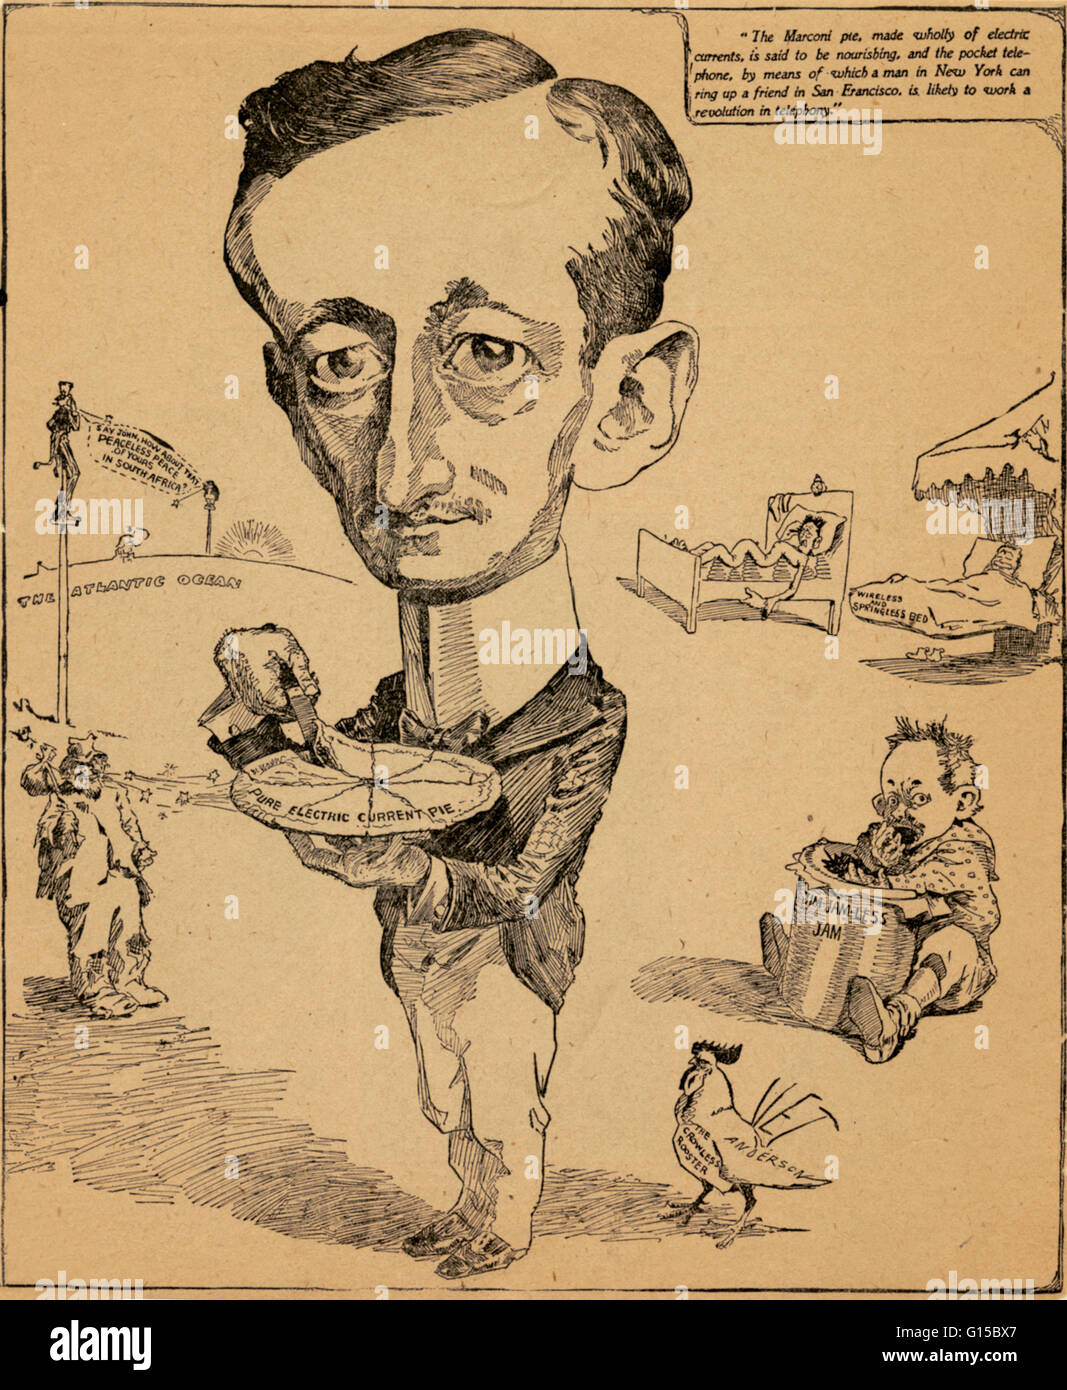 Caricature of Guglielmo Marconi (1874-1937) holding a 'pure electric current pie.' The text at top right reads: 'The Marconi pie, made wholly of electric currents, is said to be nourishing, and the pocket telephone, by means of which a man in New York can Stock Photo